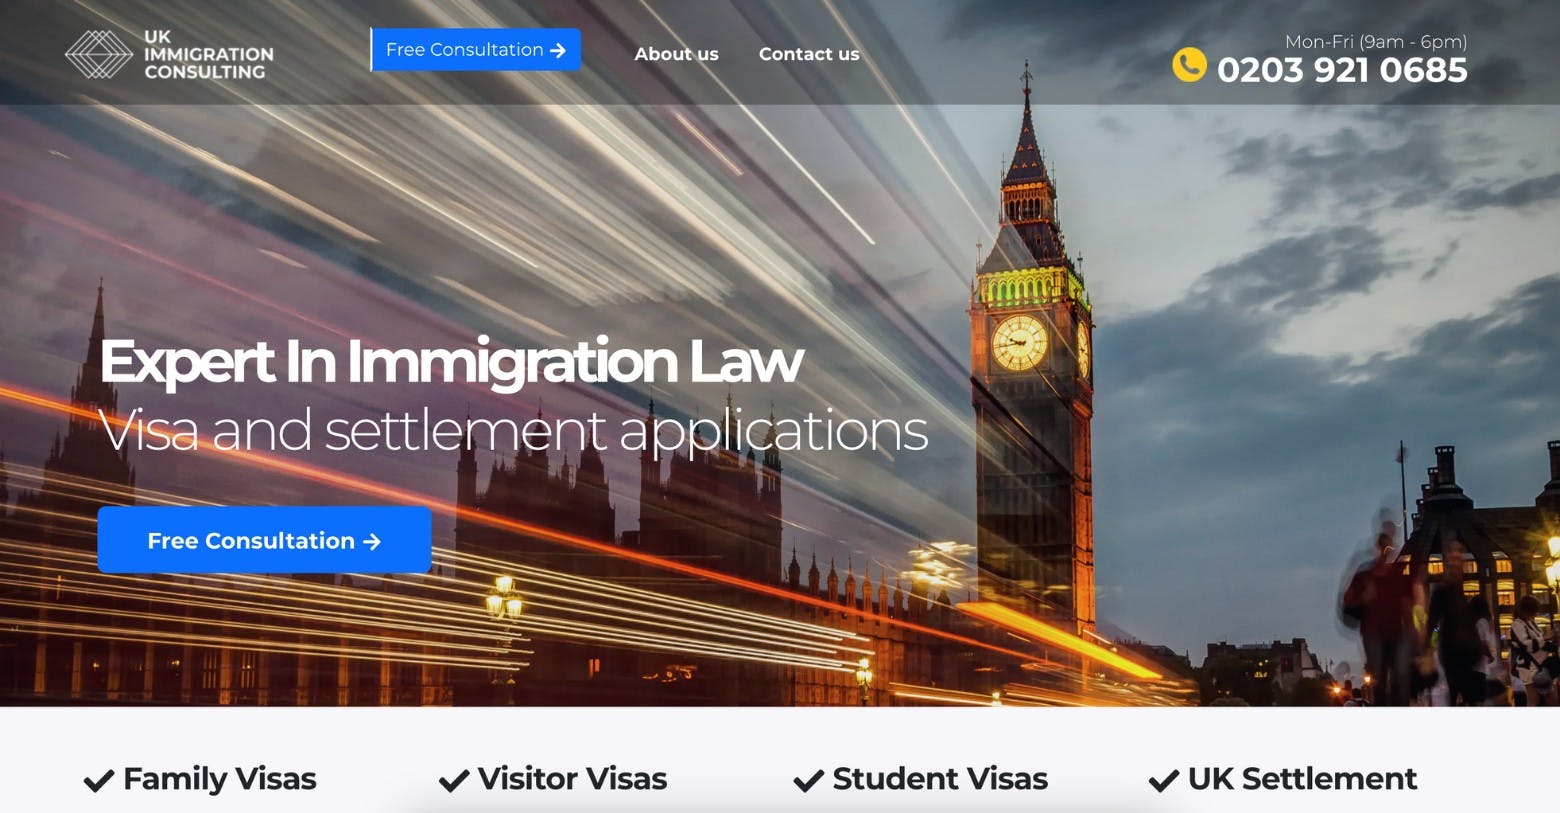 UK Immigration Consulting